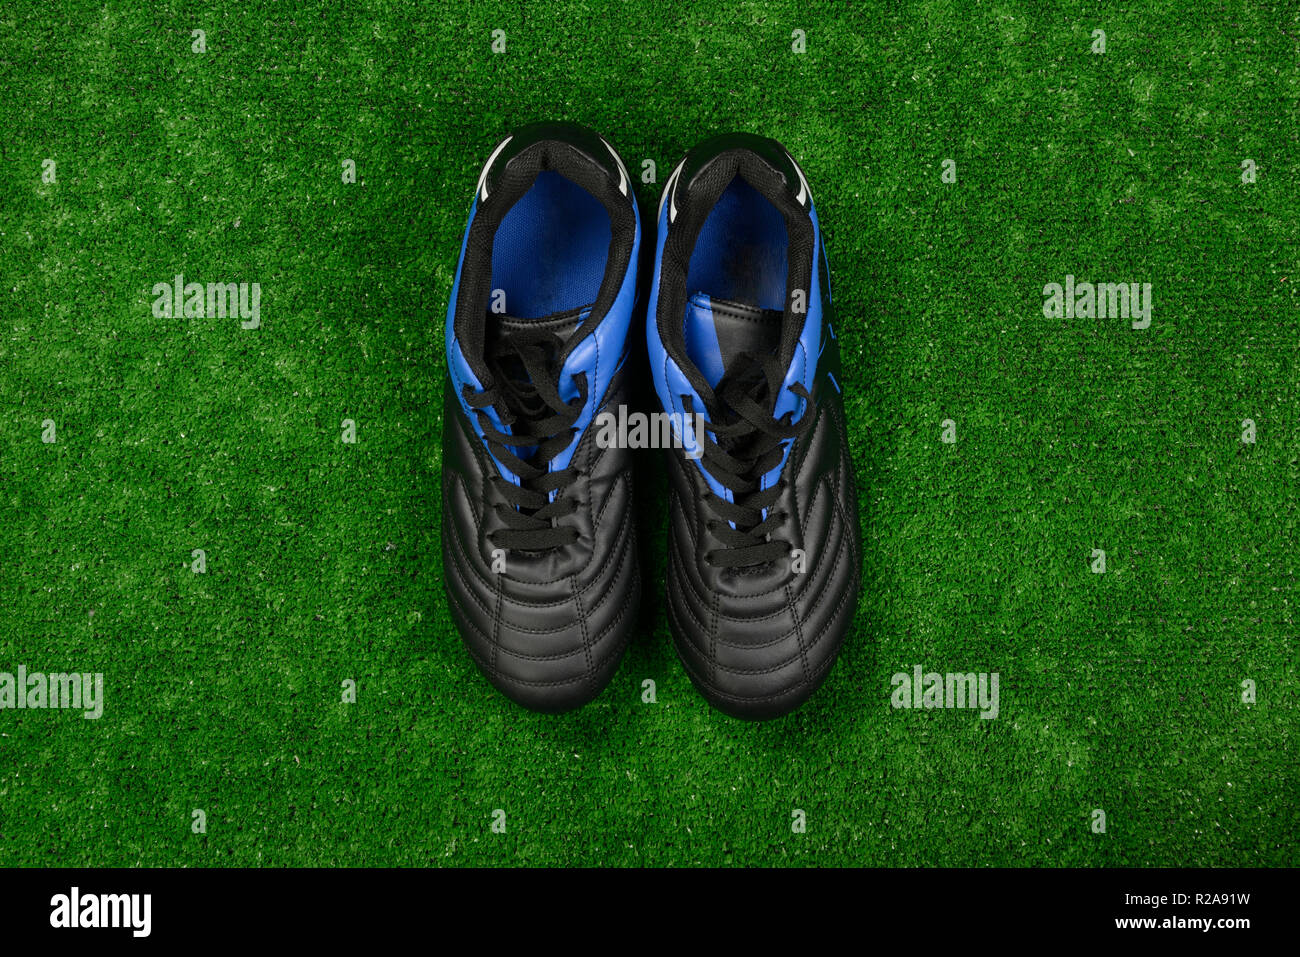 Football boots on the artificial grass 